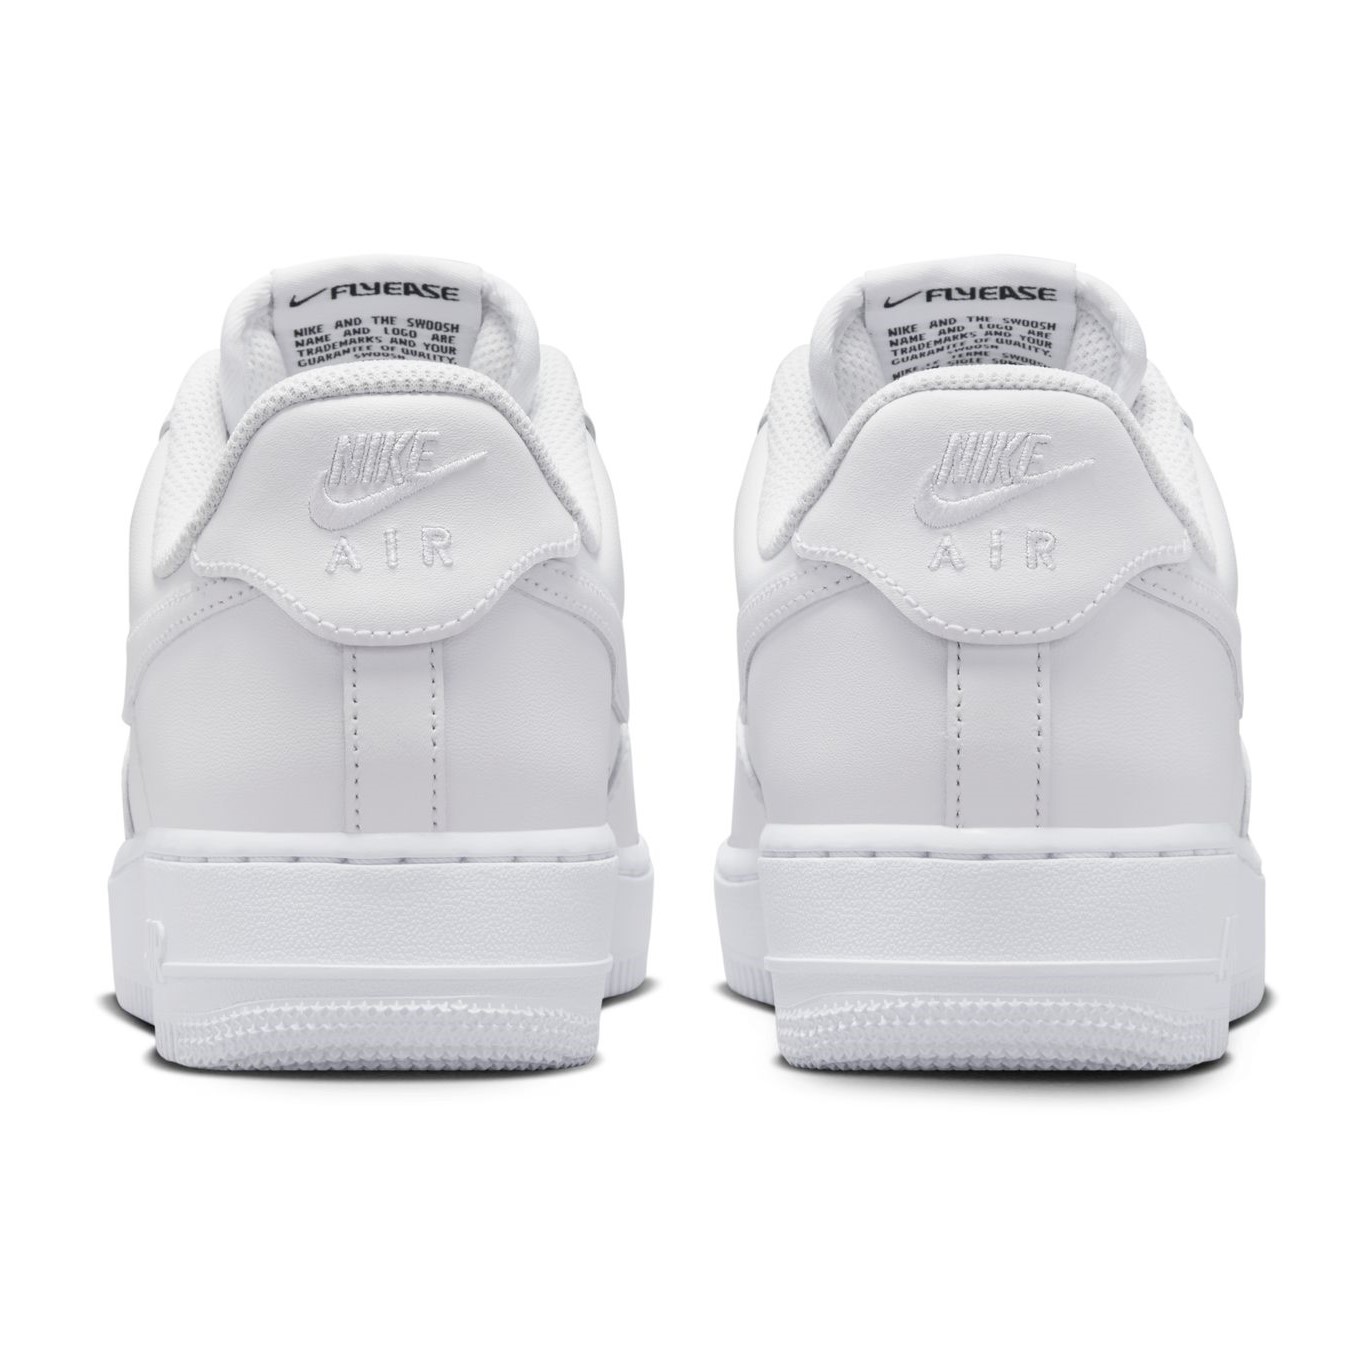 GIÀY THỂ THAO NỮ NIKE AIR FORCE 1 07 EASYON WHITE WOMENS SHOES DX5883-100 10